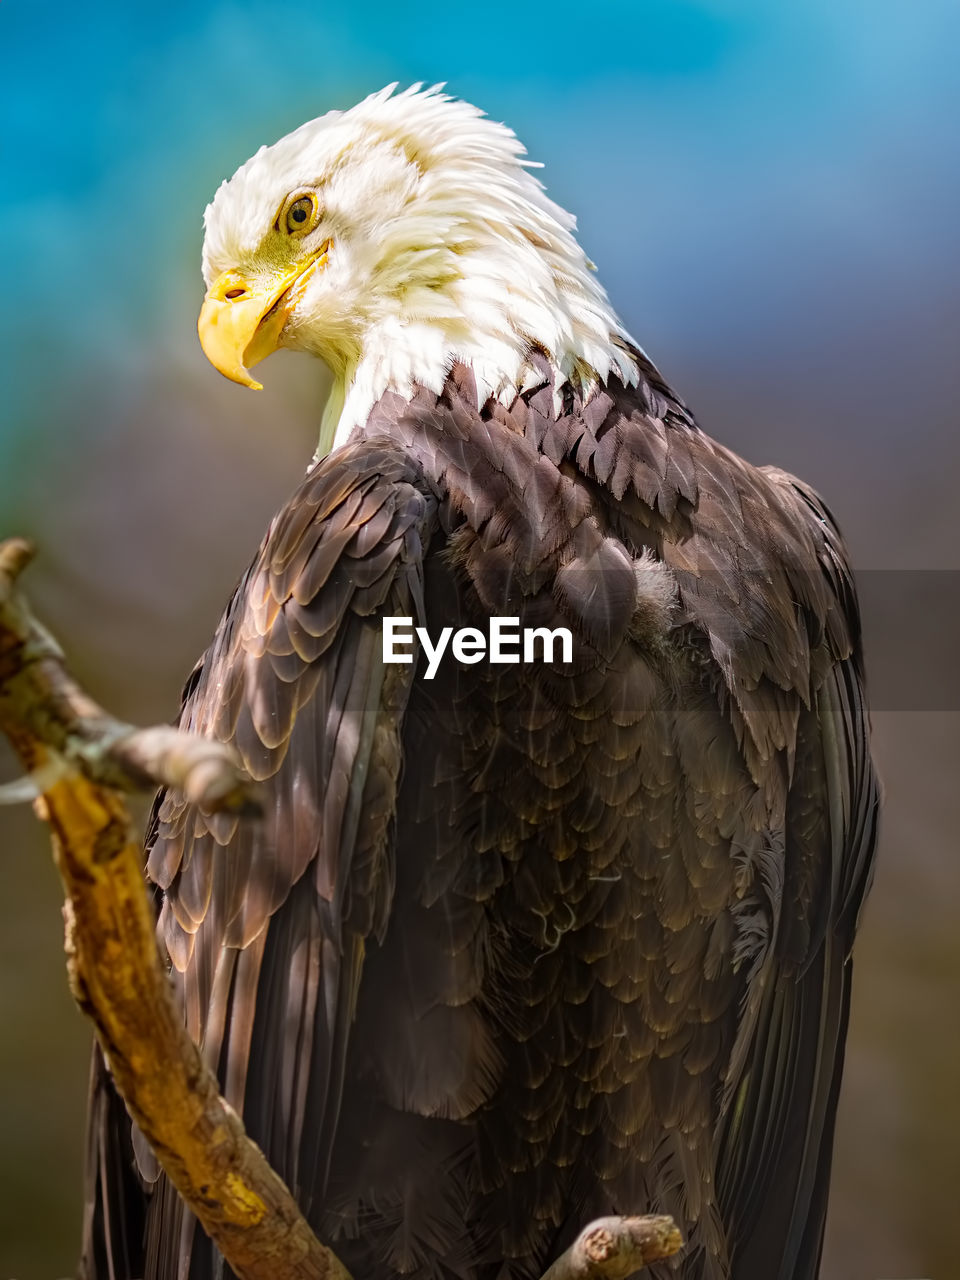 American bald eagle sitting on a branch